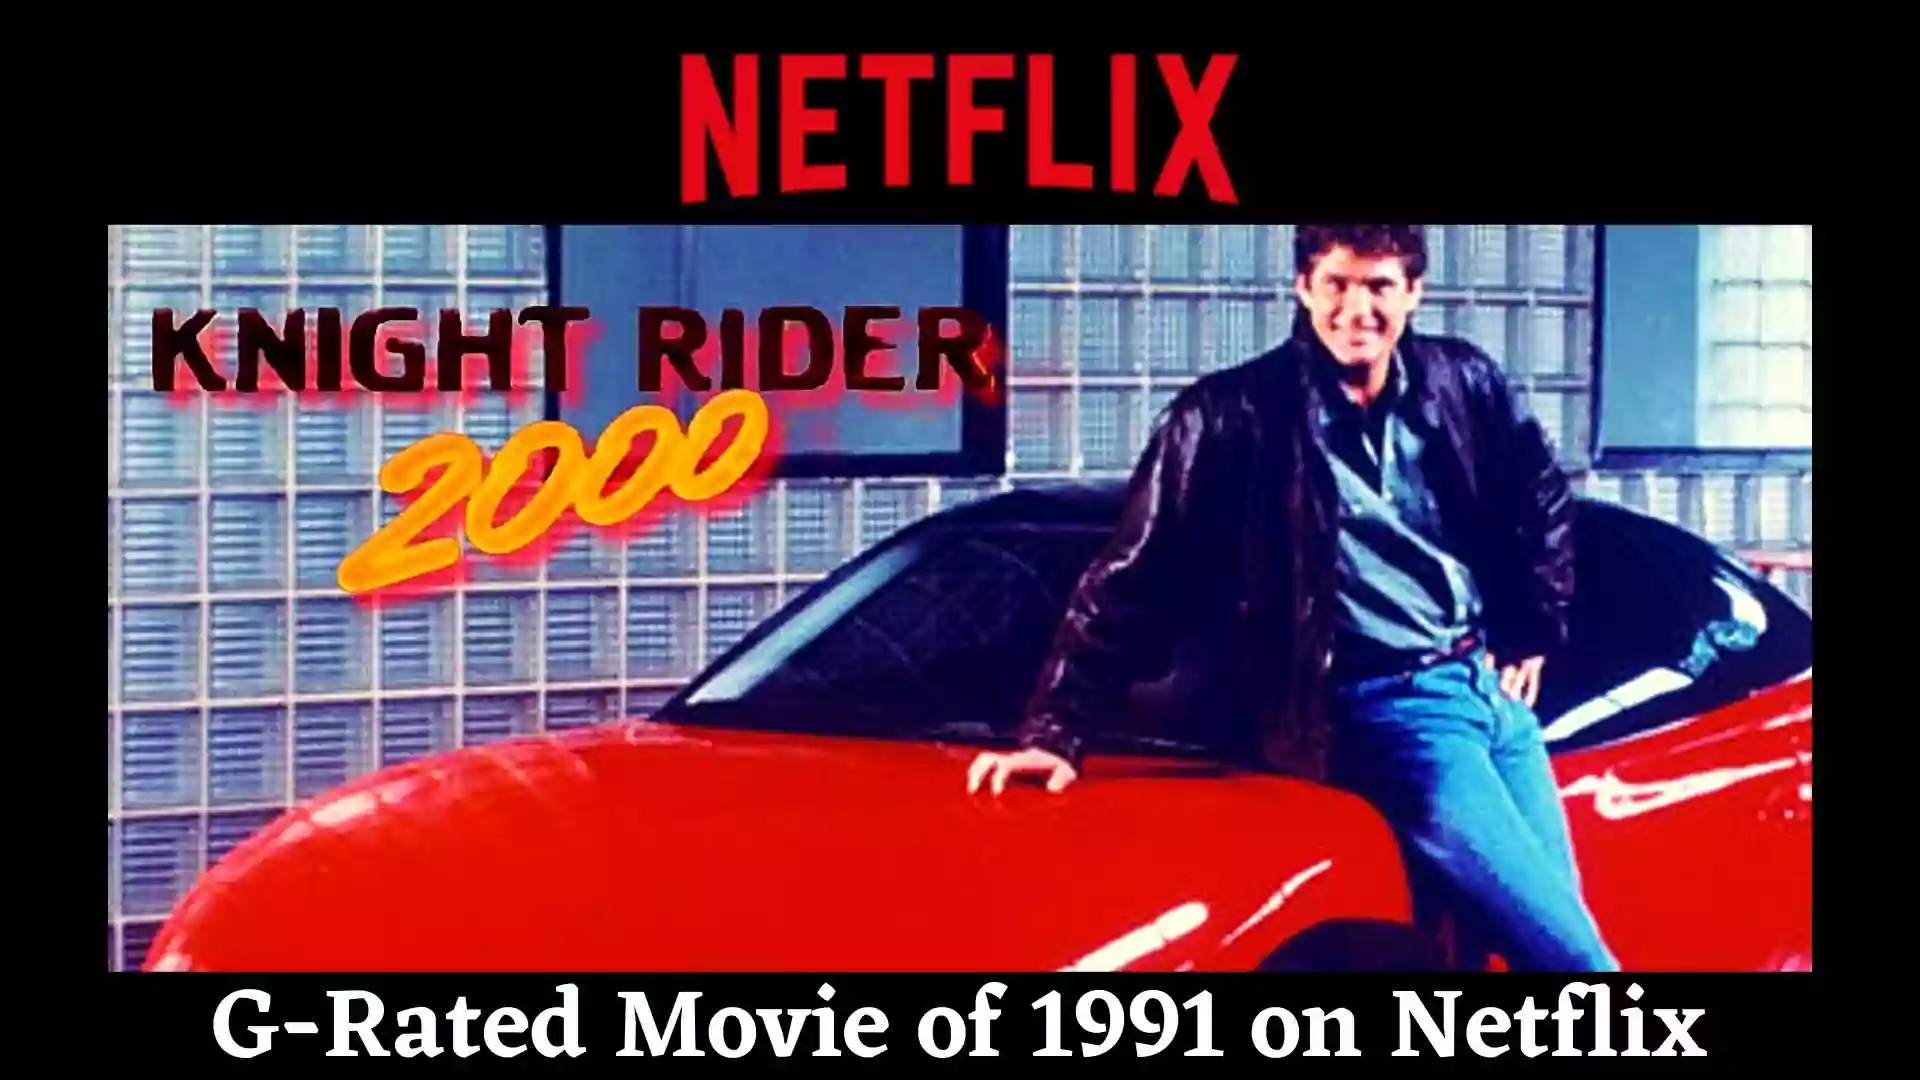 G-Rated Movie of 1991 on Netflix